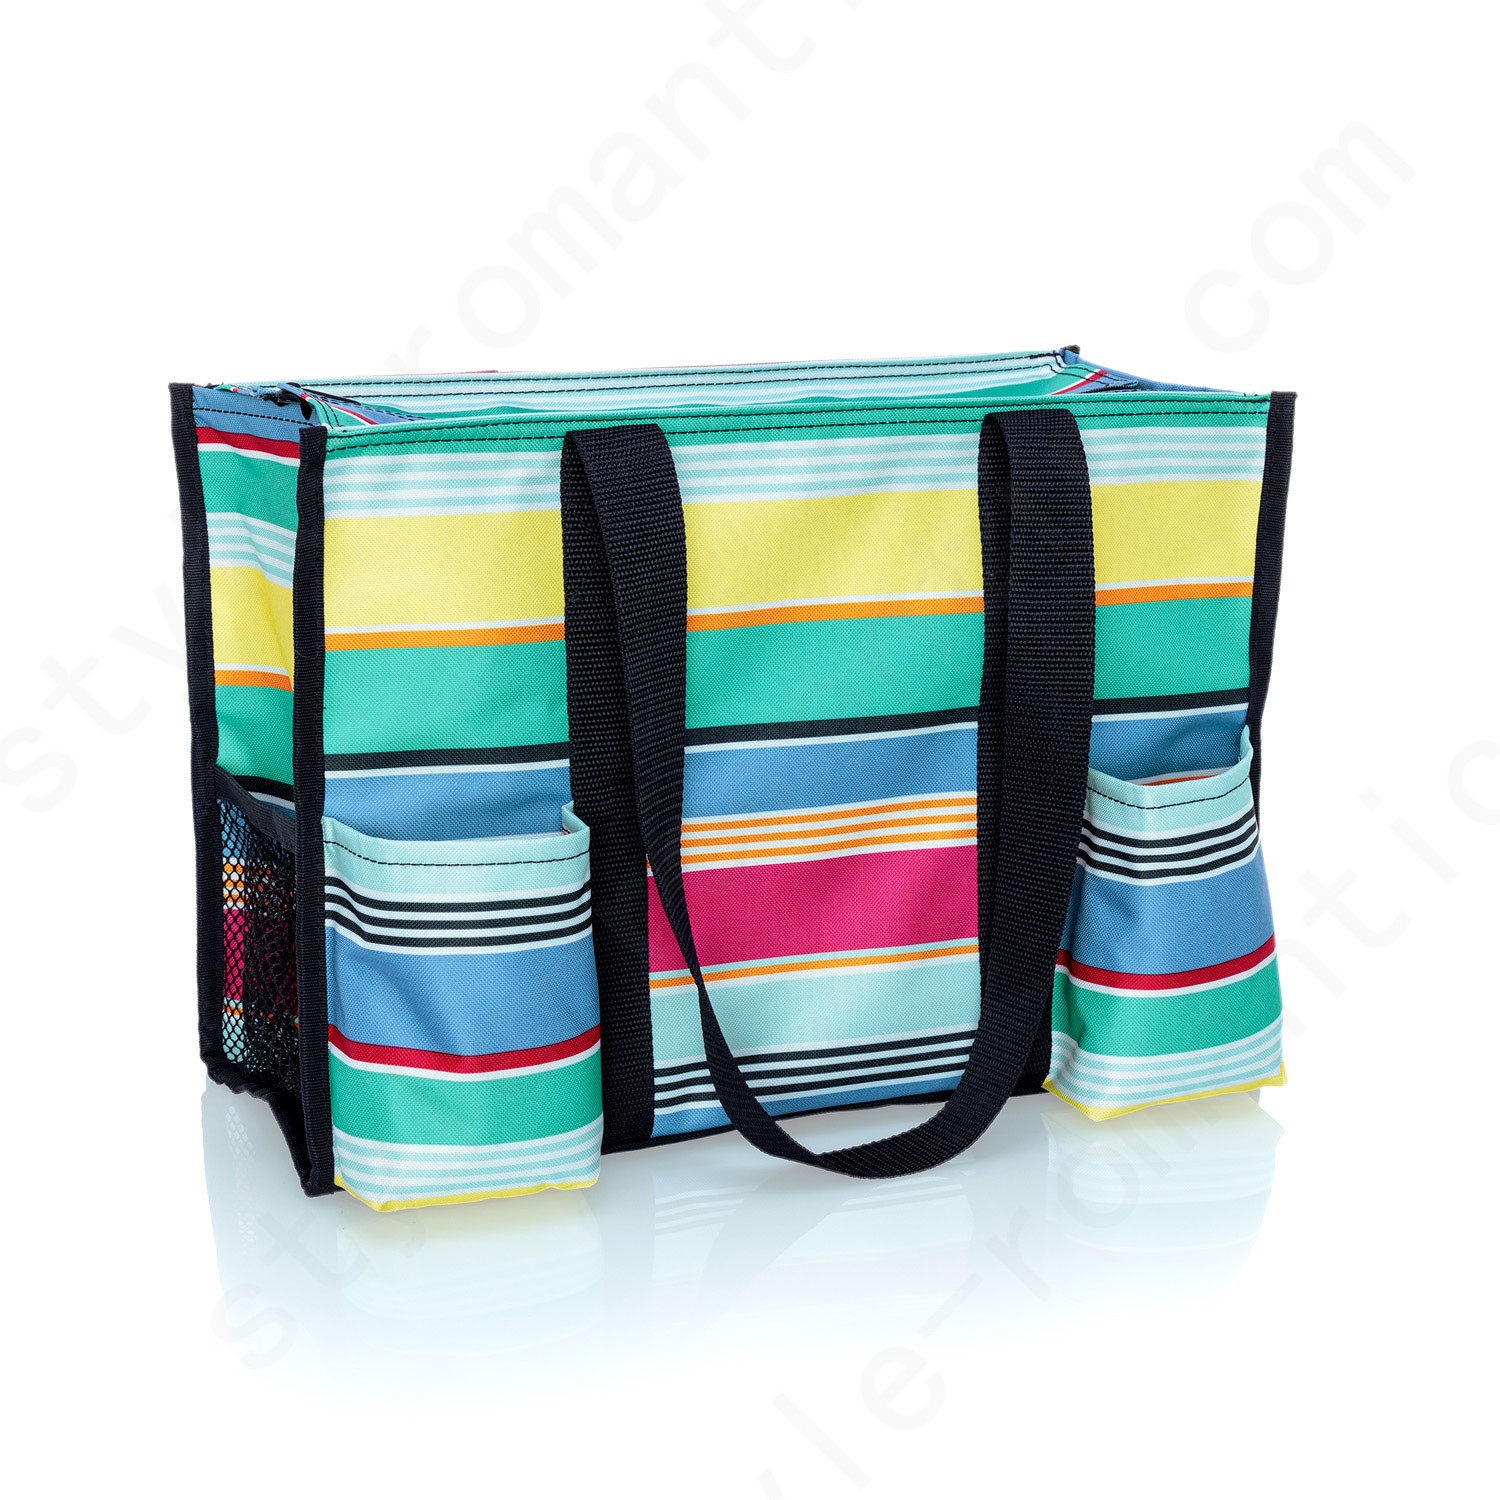 Thirty-One Gifts Zip-Top Organizing Utility Tote - Patio Pop - Thirty-One Gifts Zip-Top Organizing Utility Tote - Patio Pop